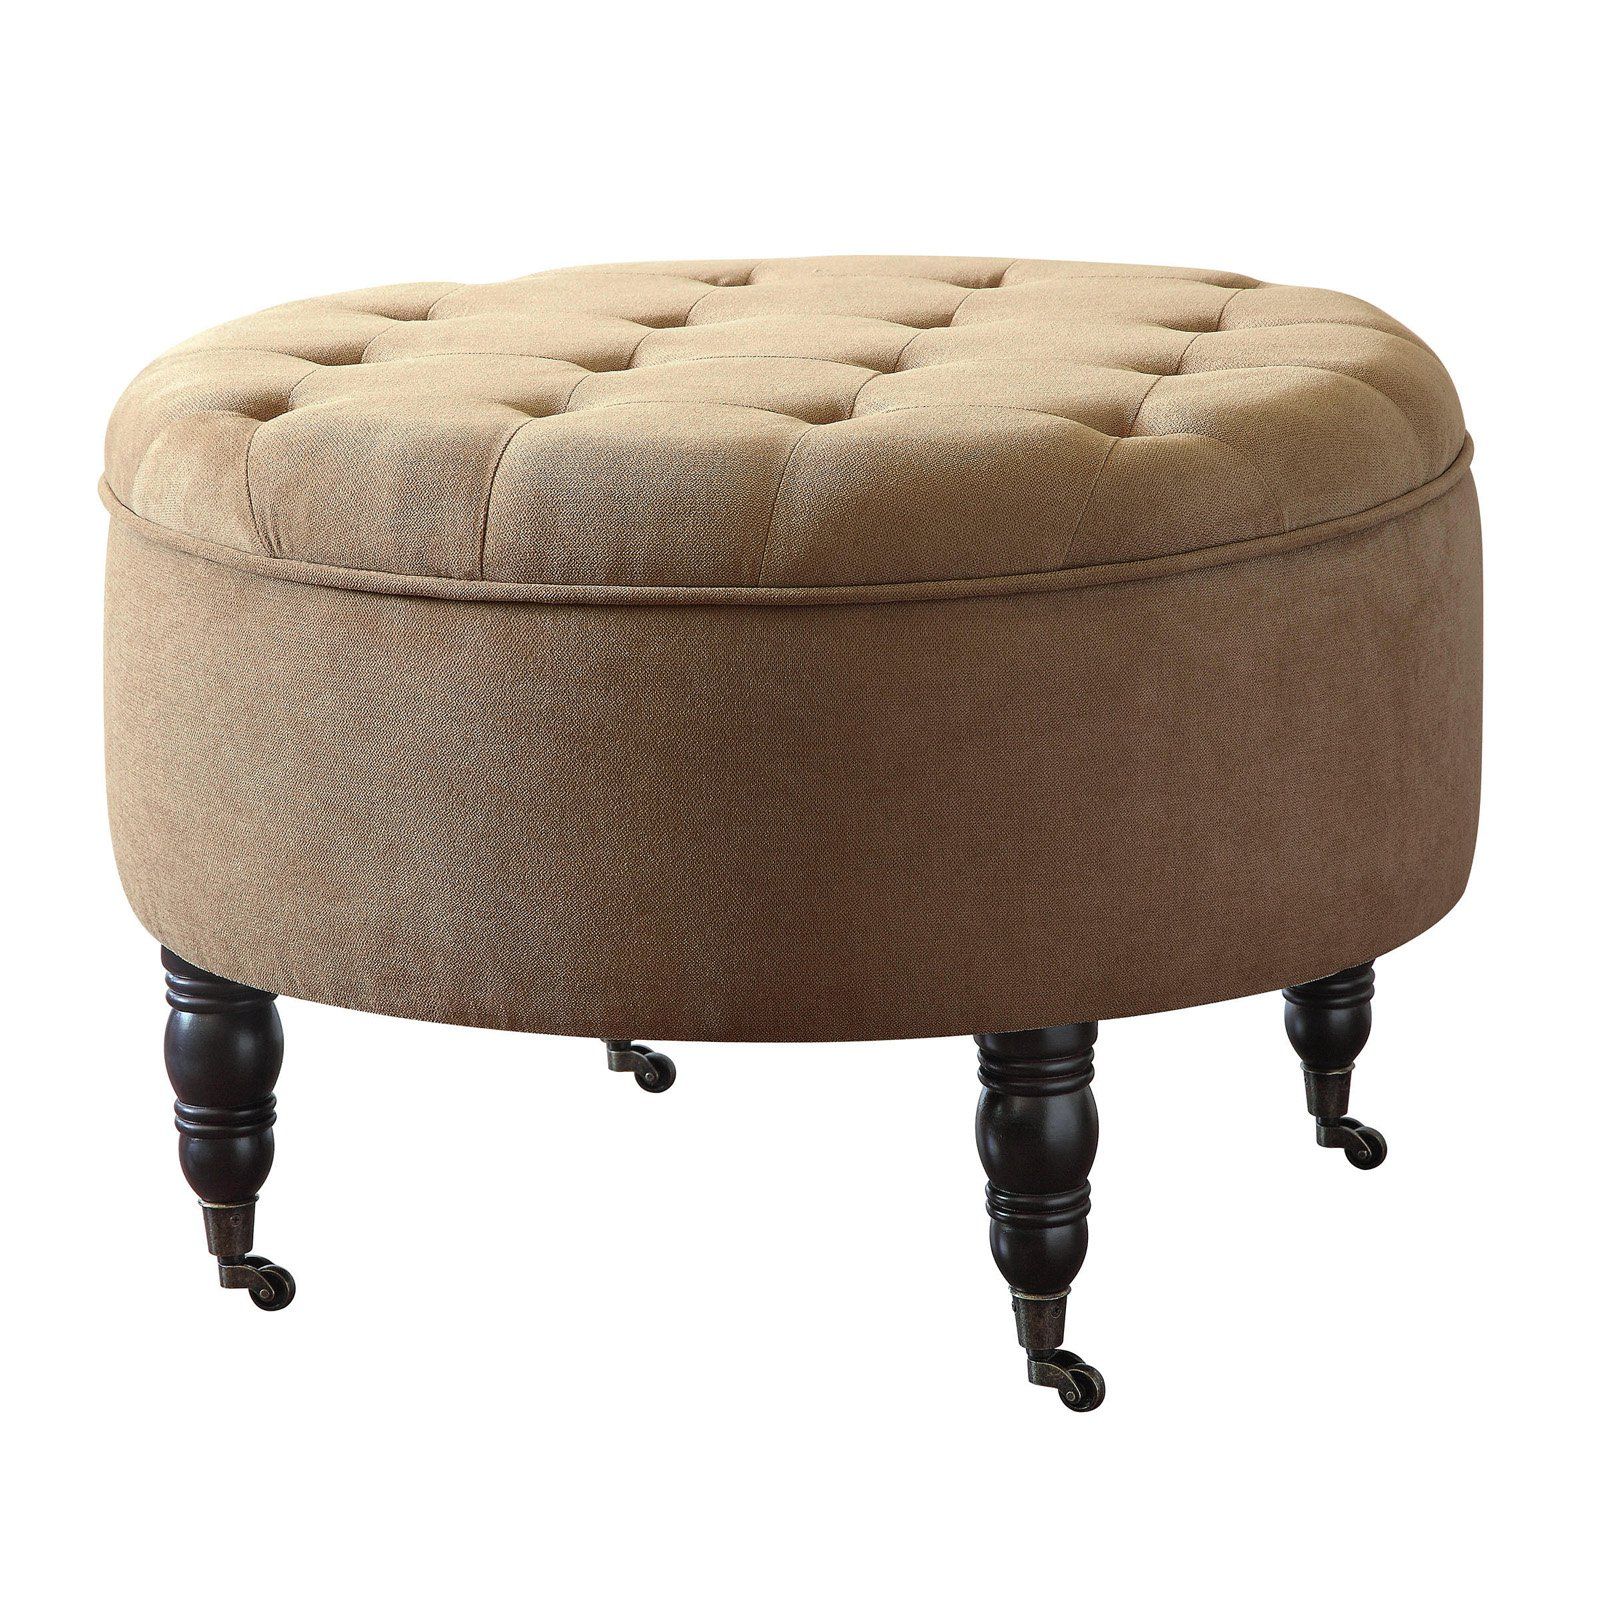 Elle Decor Quinn Round Tufted Ottoman With Storage And Casters In Favorite Wool Round Pouf Ottomans (View 2 of 10)